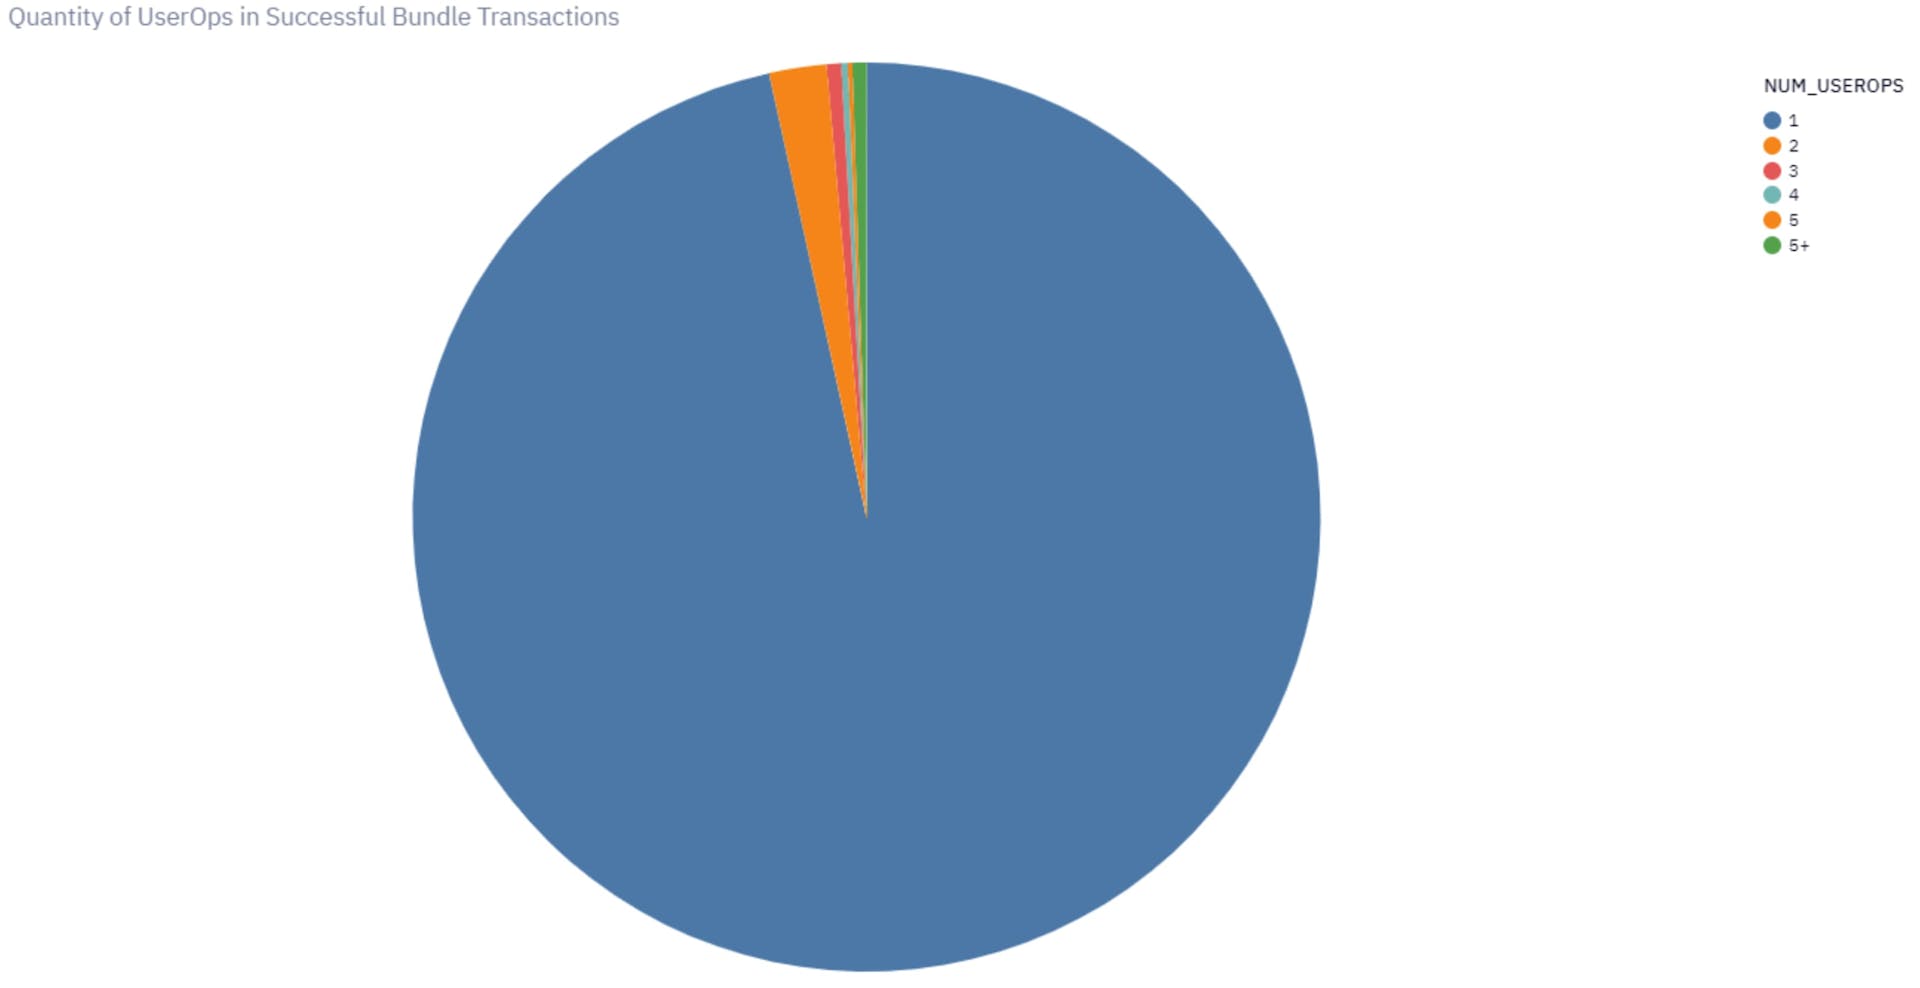 pie-chart-explaining-the quantity of userops in successful bundle transactions